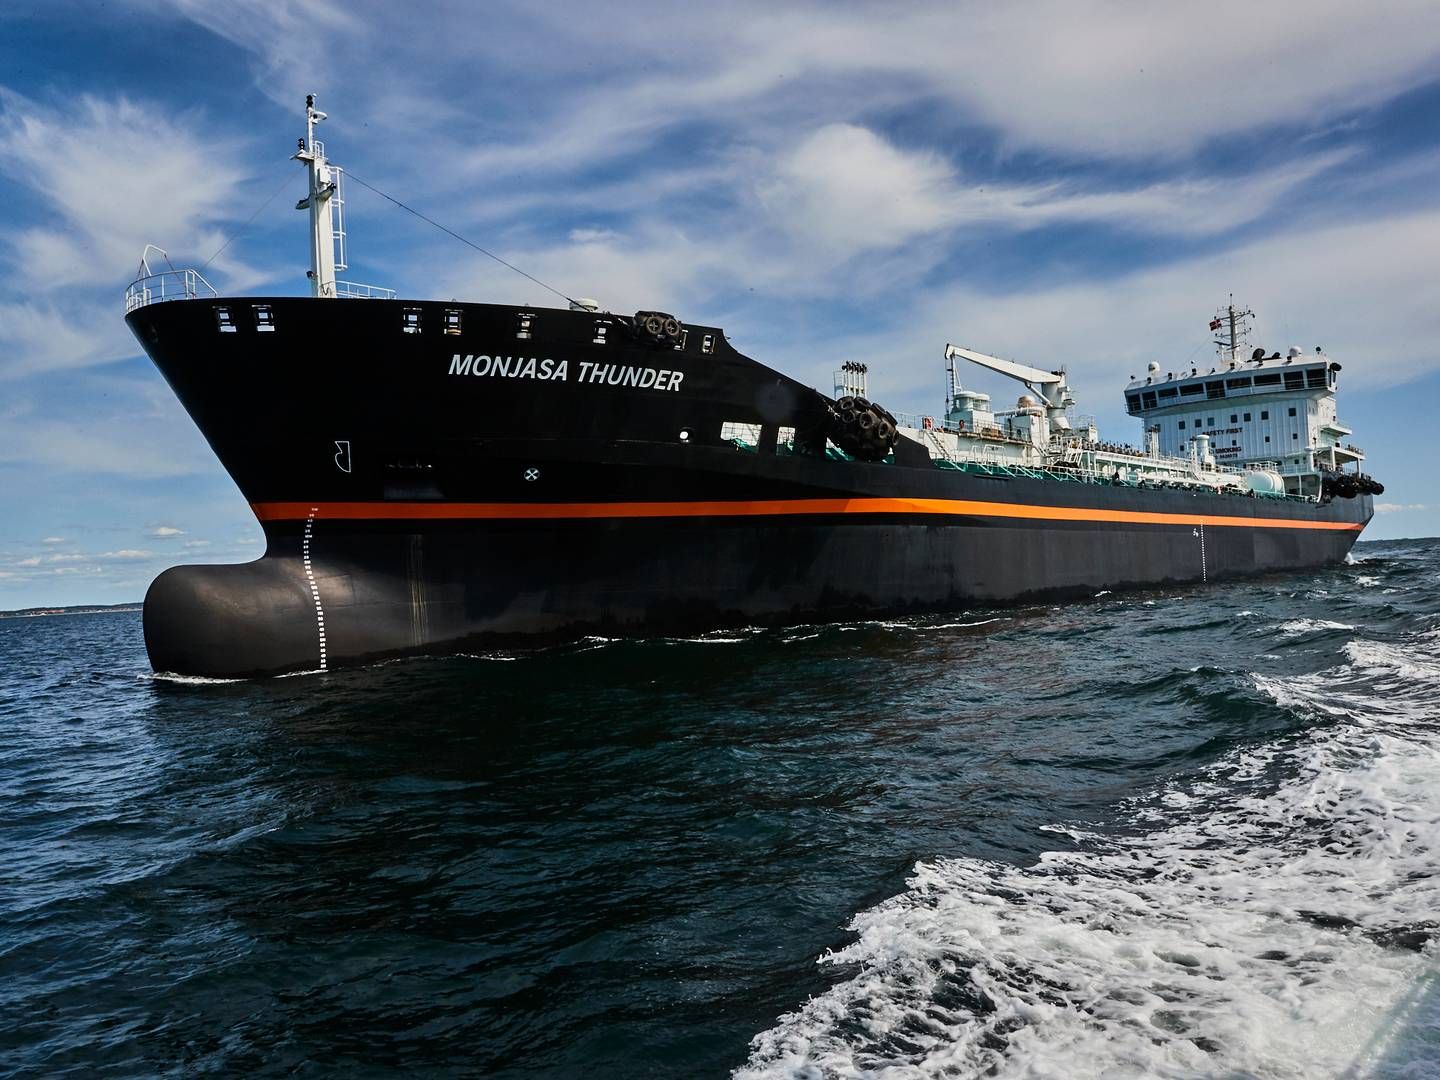 Monjasa Thunder has capacity for 20,000 tonnes and will be transporting bunker oil in West Africa. | Photo: Monjasa